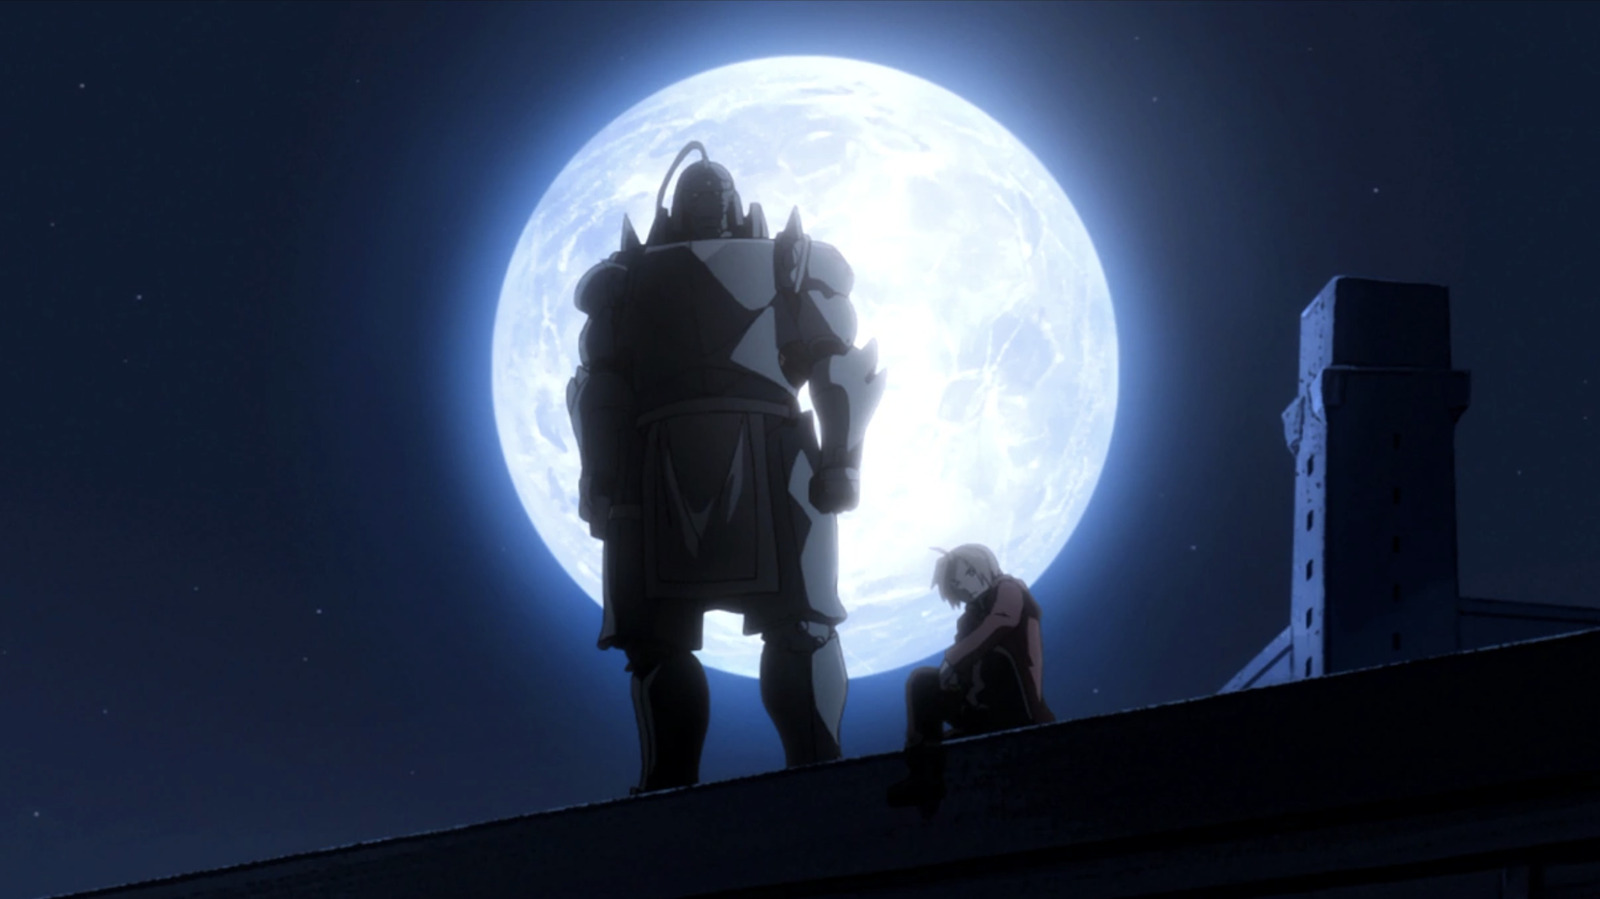 Fullmetal Alchemist The Other Brothers Elric: Part 1 (TV Episode